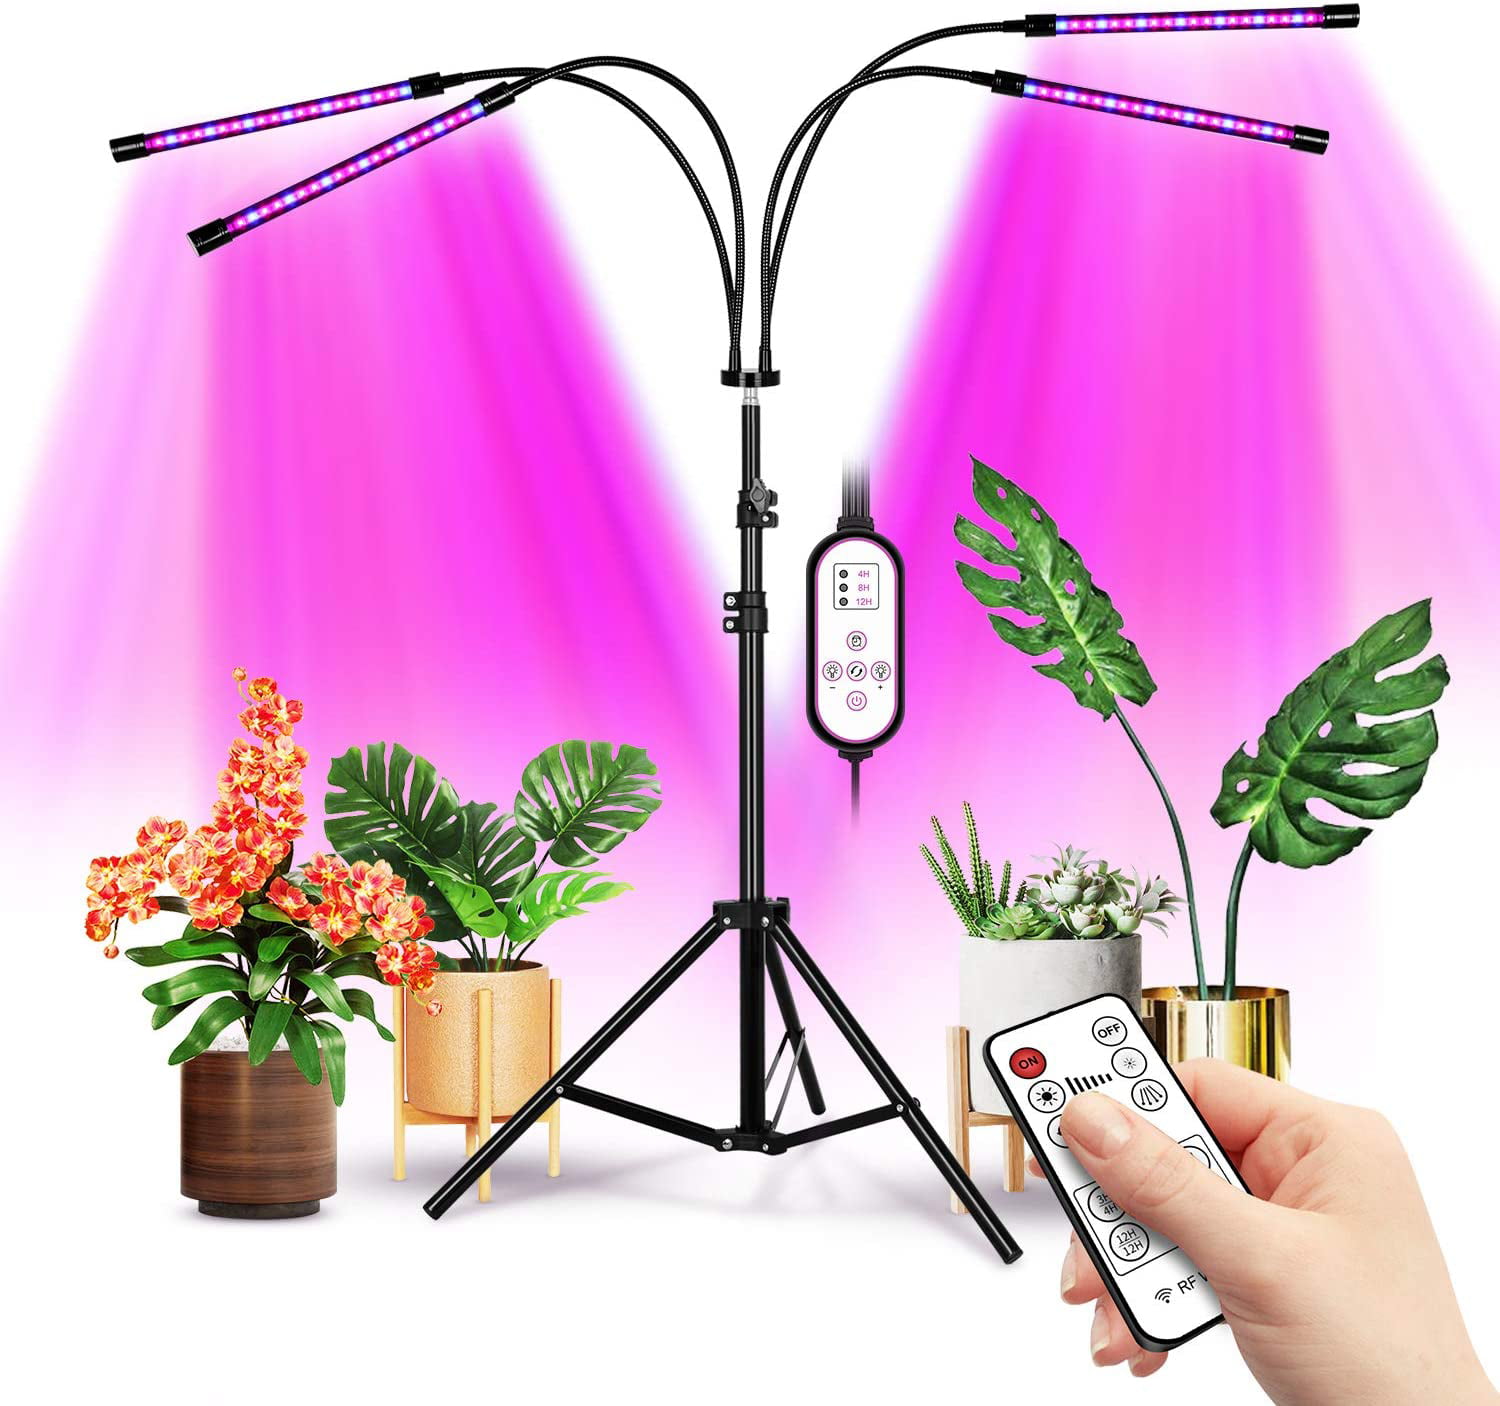 Details about   60/80LED Grow Light Hydroponics 3/4 Head Flower Indoor Plant Growing Lamp+Remote 